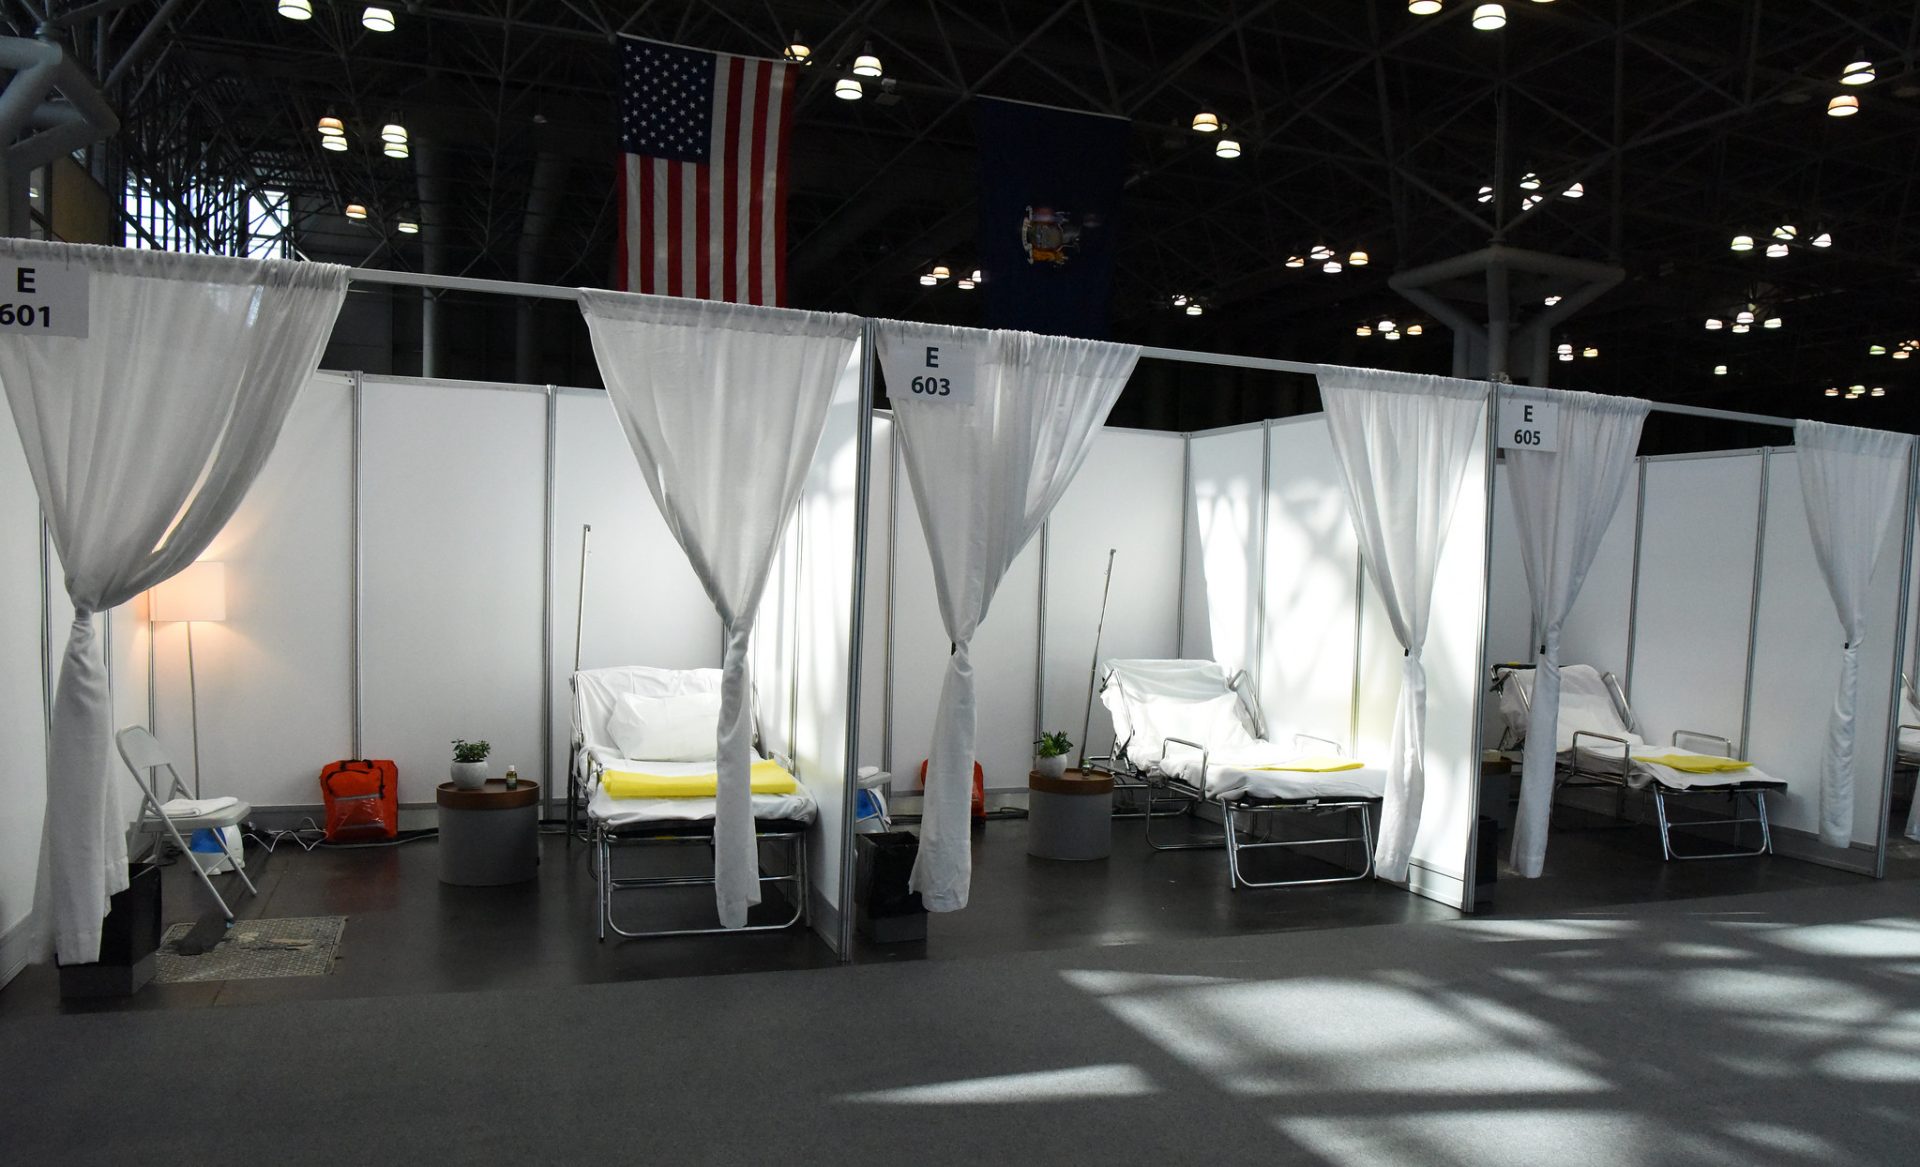 Patient care units at the Jacob K. Javits Convention Center in New York City